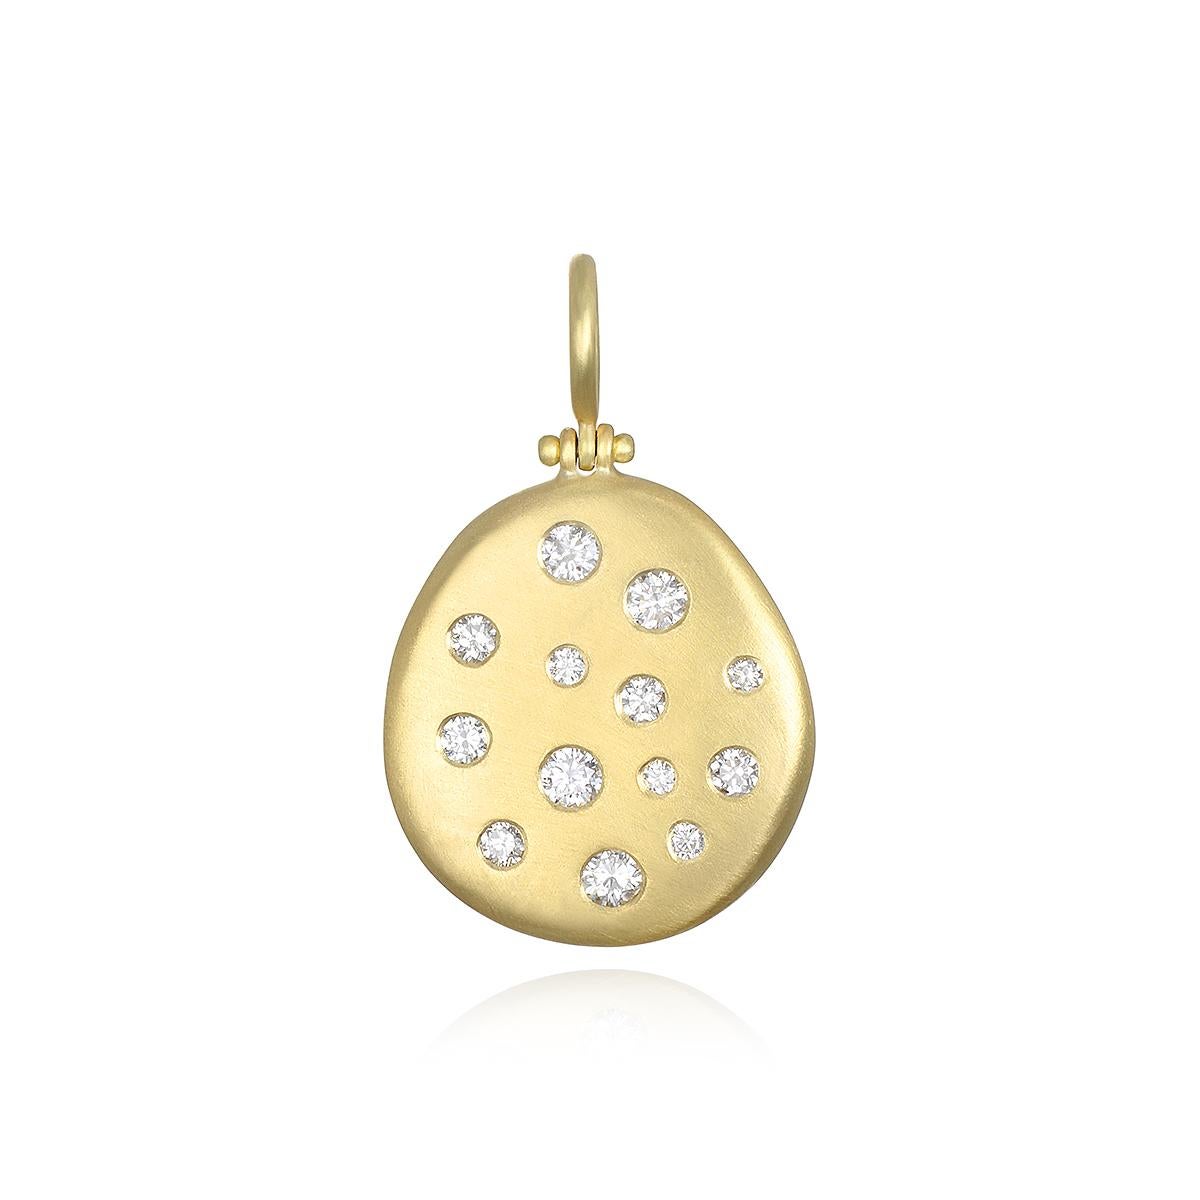 Versatile and easy to wear, Faye Kim's 18 Karat Gold Diamond Studded Medium Hinged Dog Tag Necklace is perfect for every day. The pendant, which can be engraved, is matte-finished and hangs on an 18 Karat Gold Chain, making it perfect for any